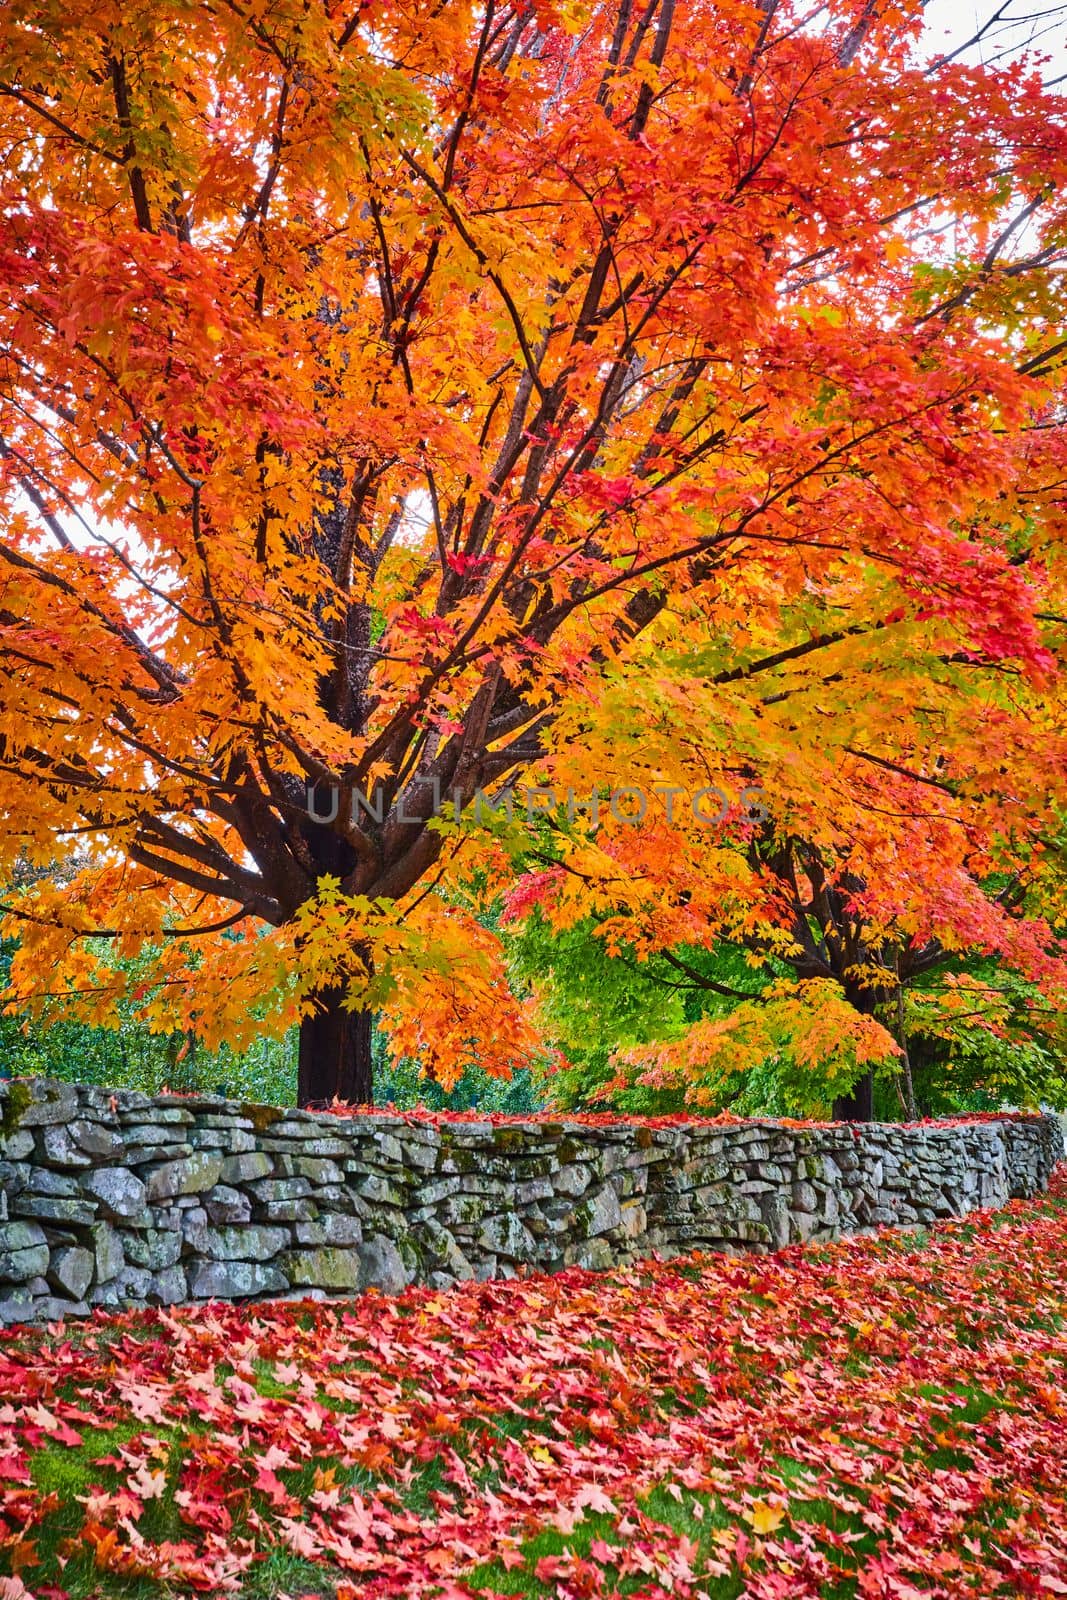 Image of Tree covered in vibrant orange leaves along stone wall with piles of red leaves on ground